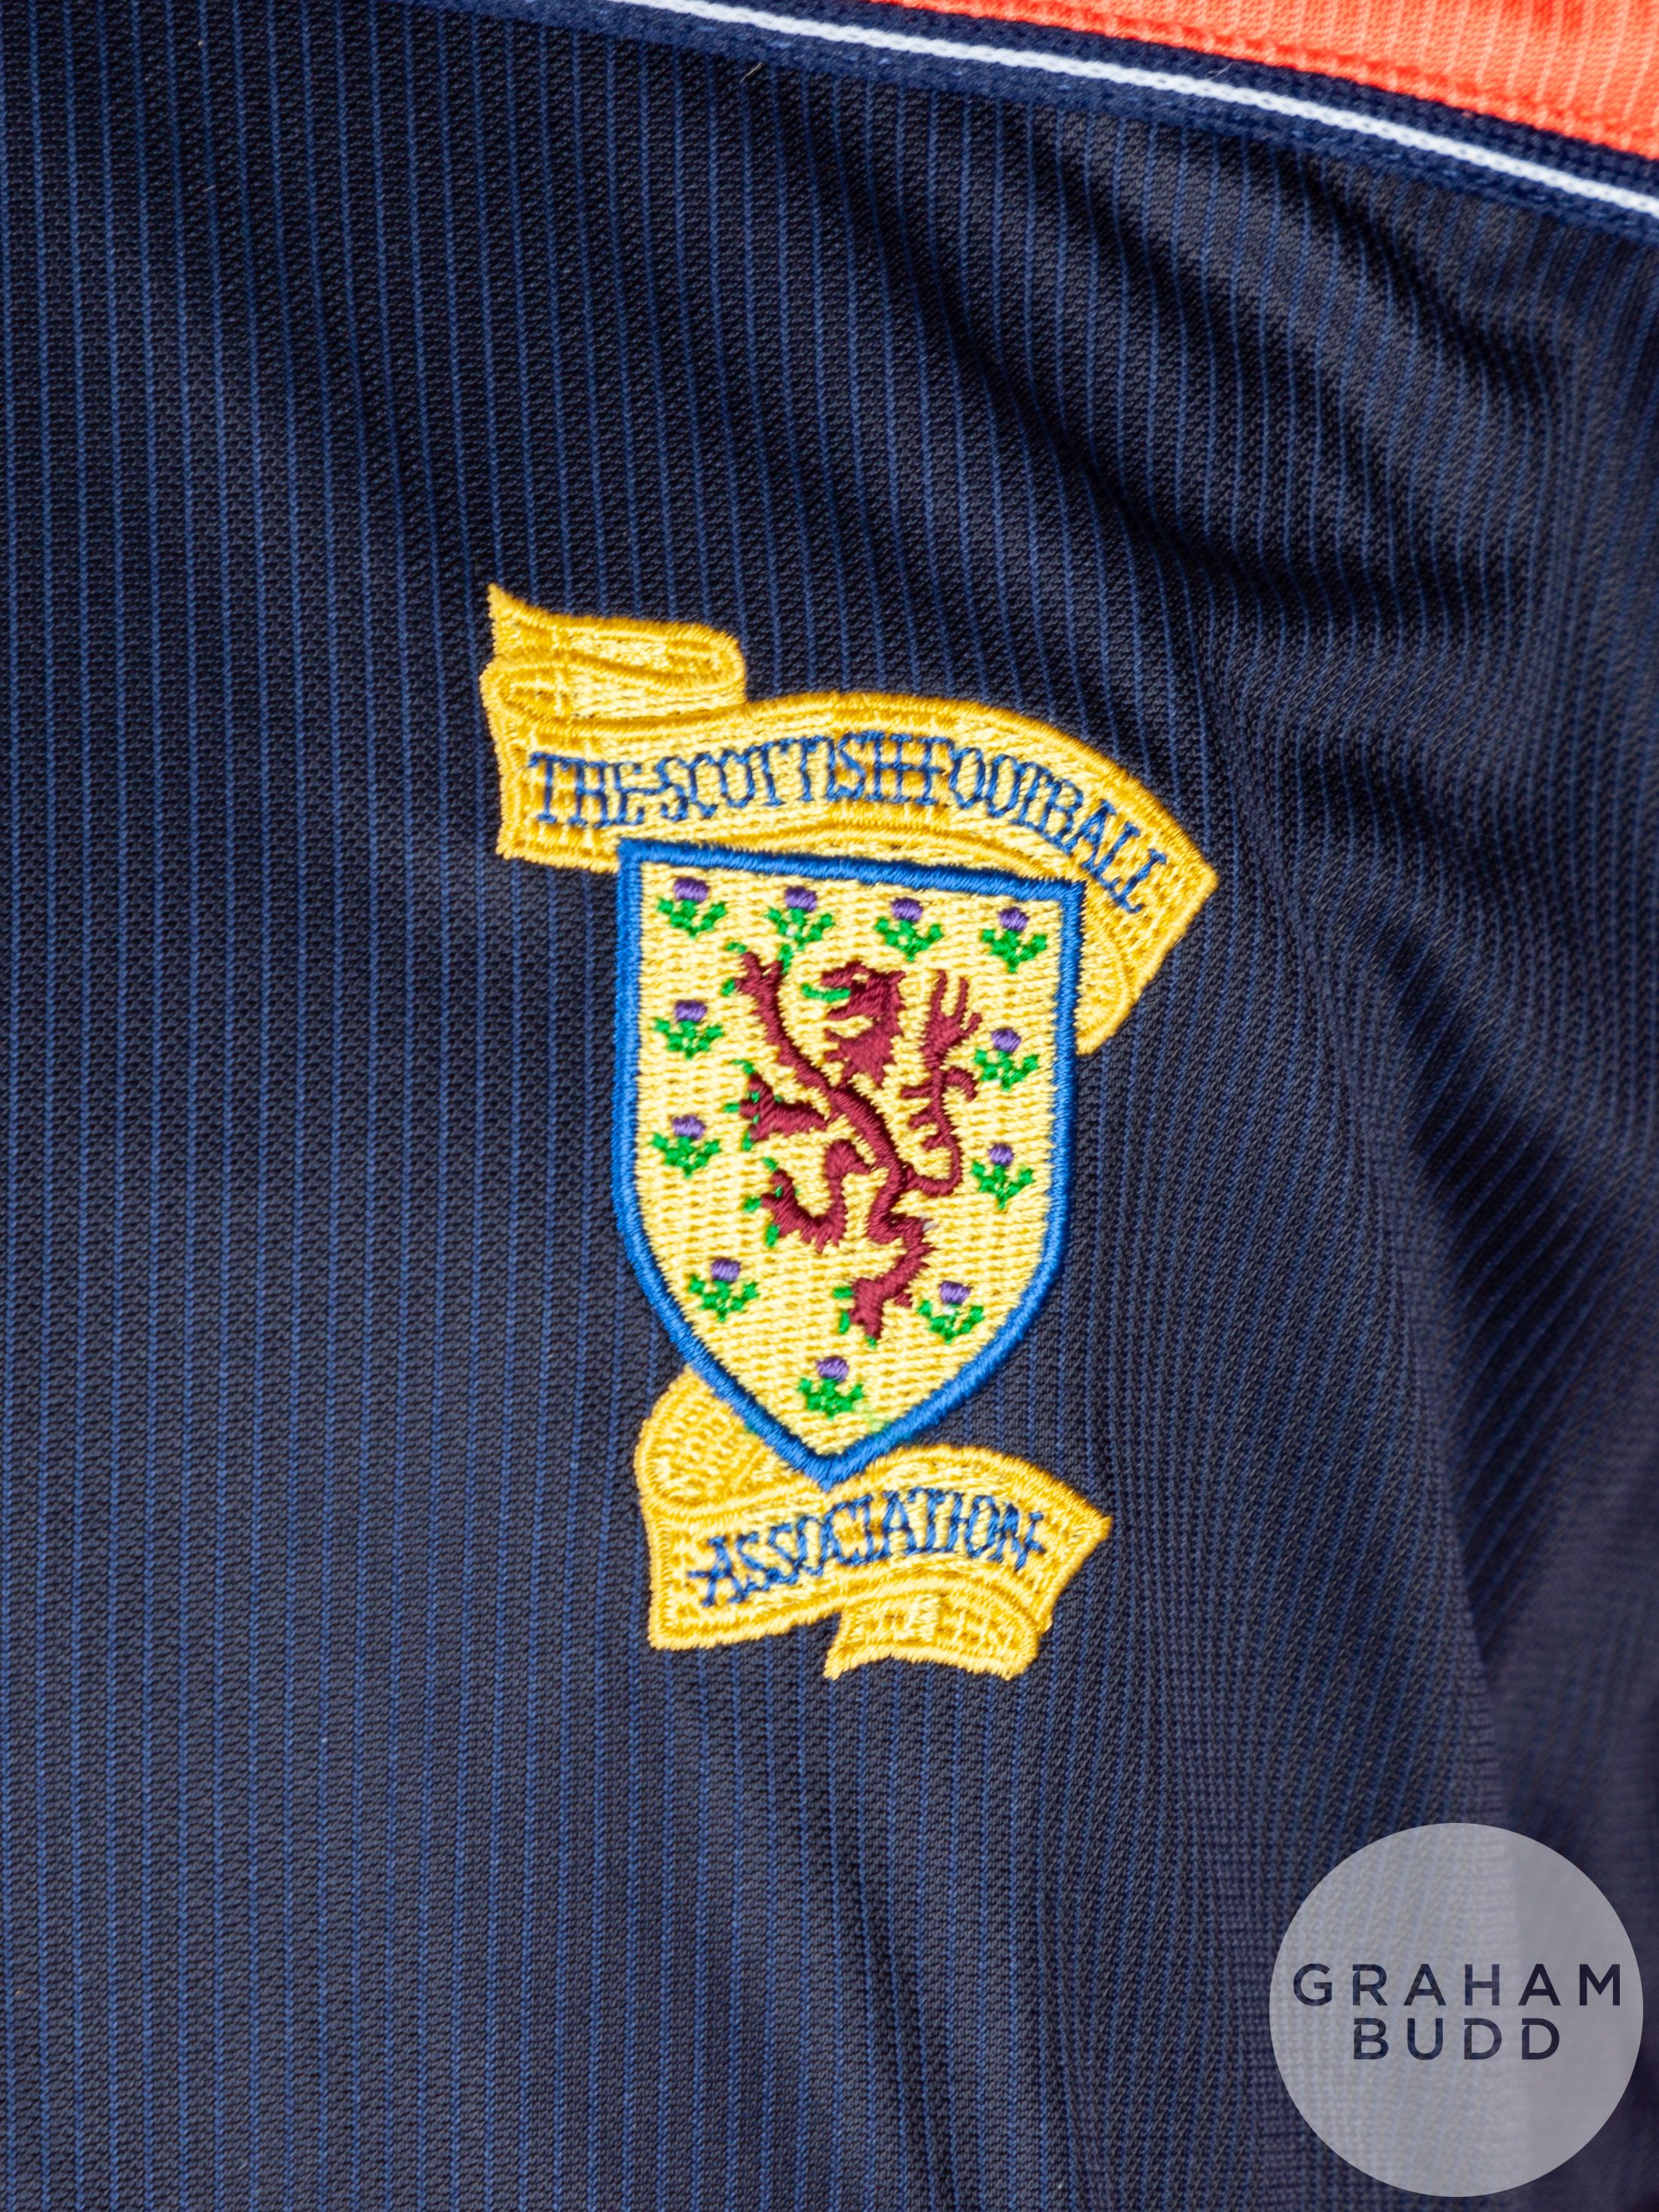 Derek Whyte salmon pink and blue No.13 Scotland v. Germany long-sleeved shirt - Image 3 of 5